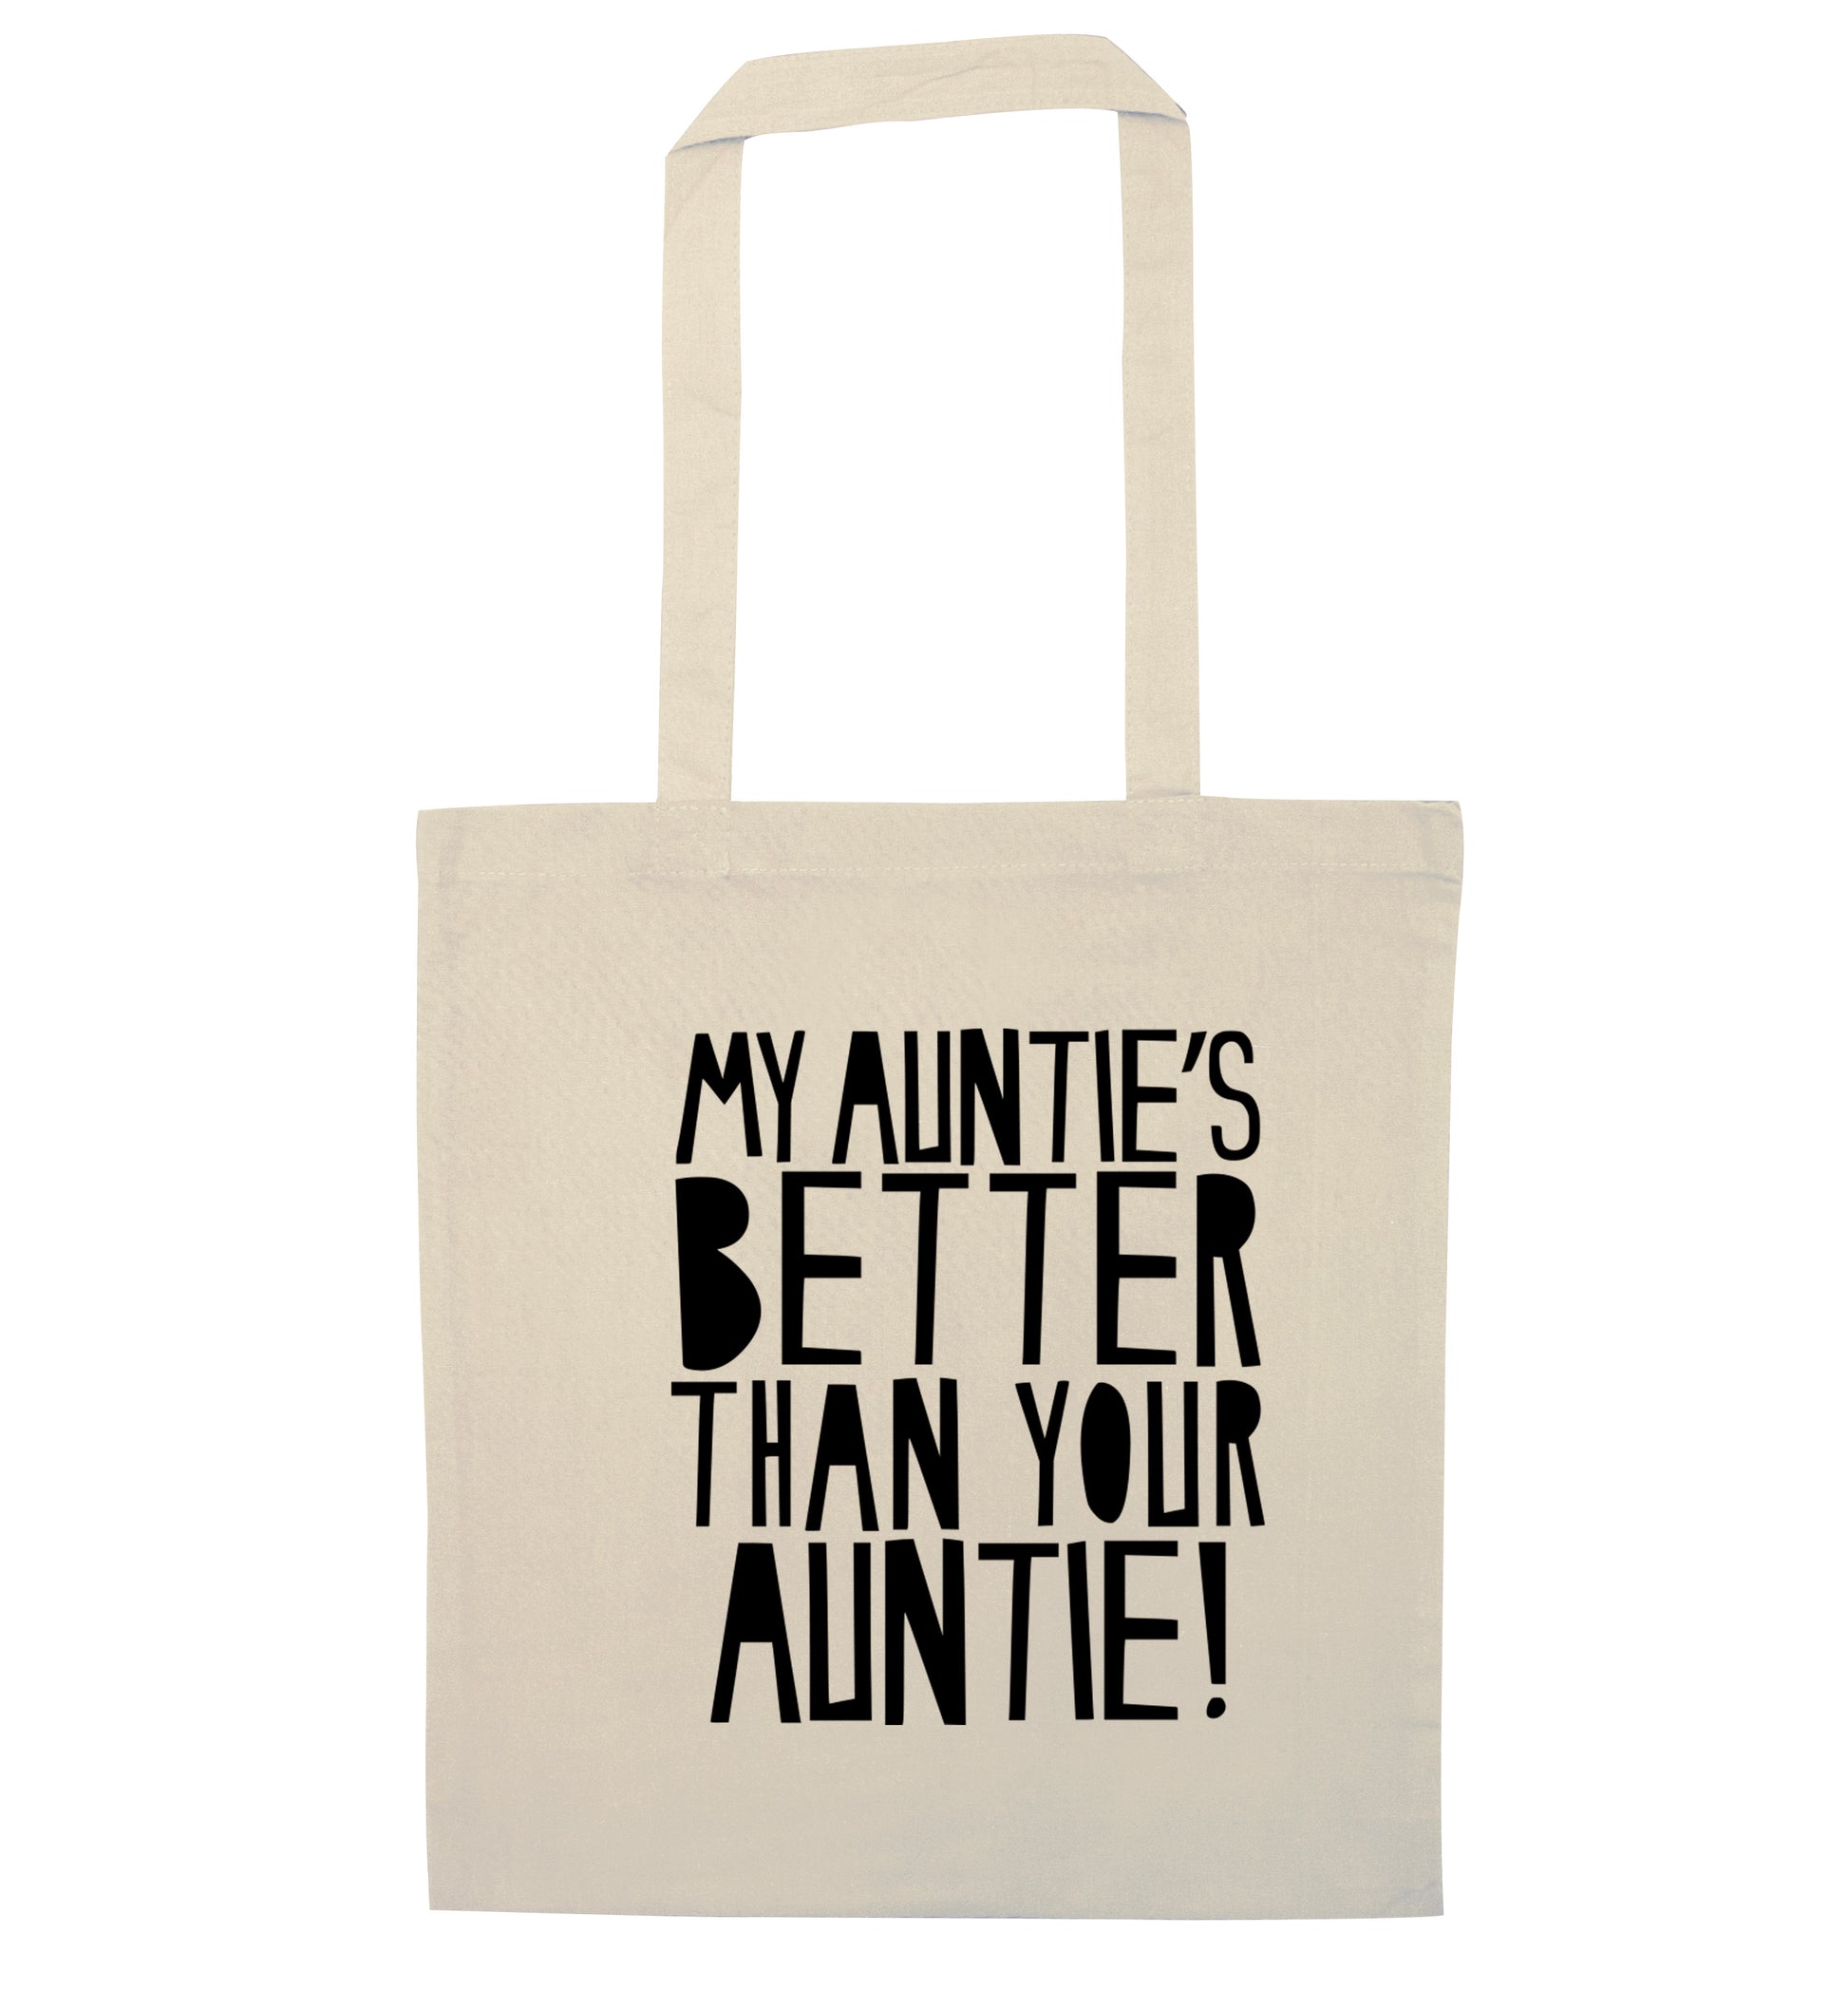 My auntie's better than your auntie natural tote bag